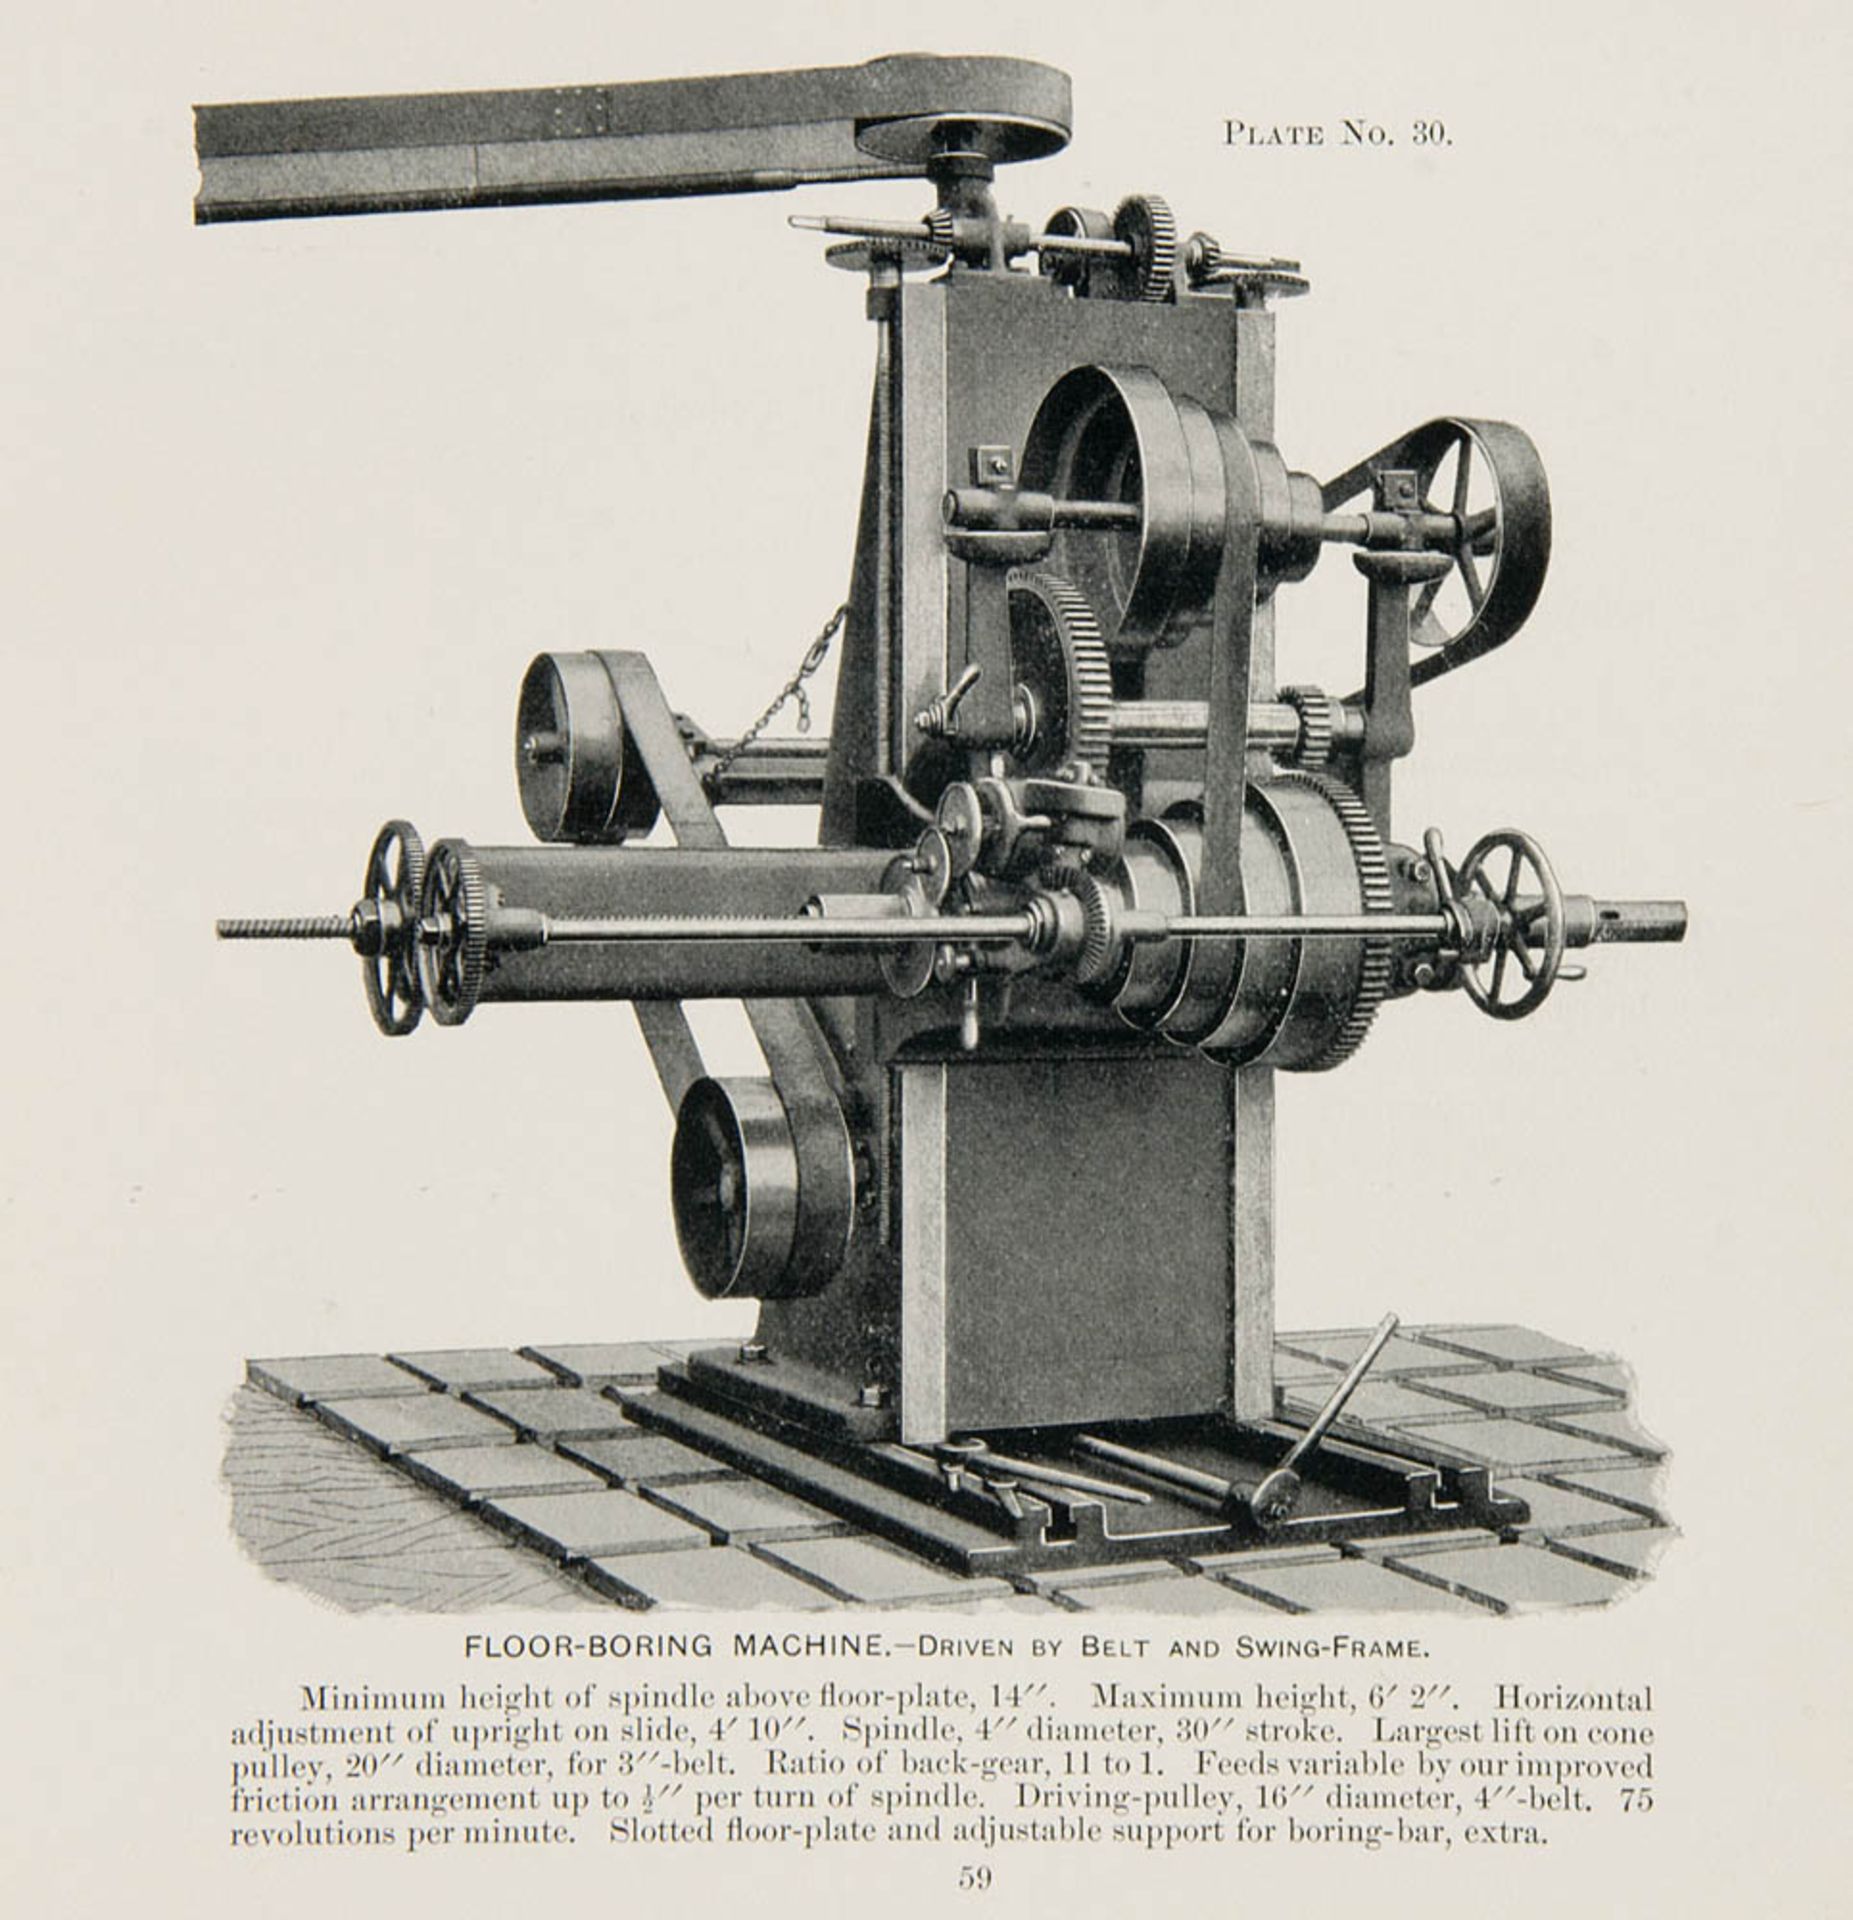 Firmenschriften - - Illustrated Catalogue and General Description of Improved Machine Tools for